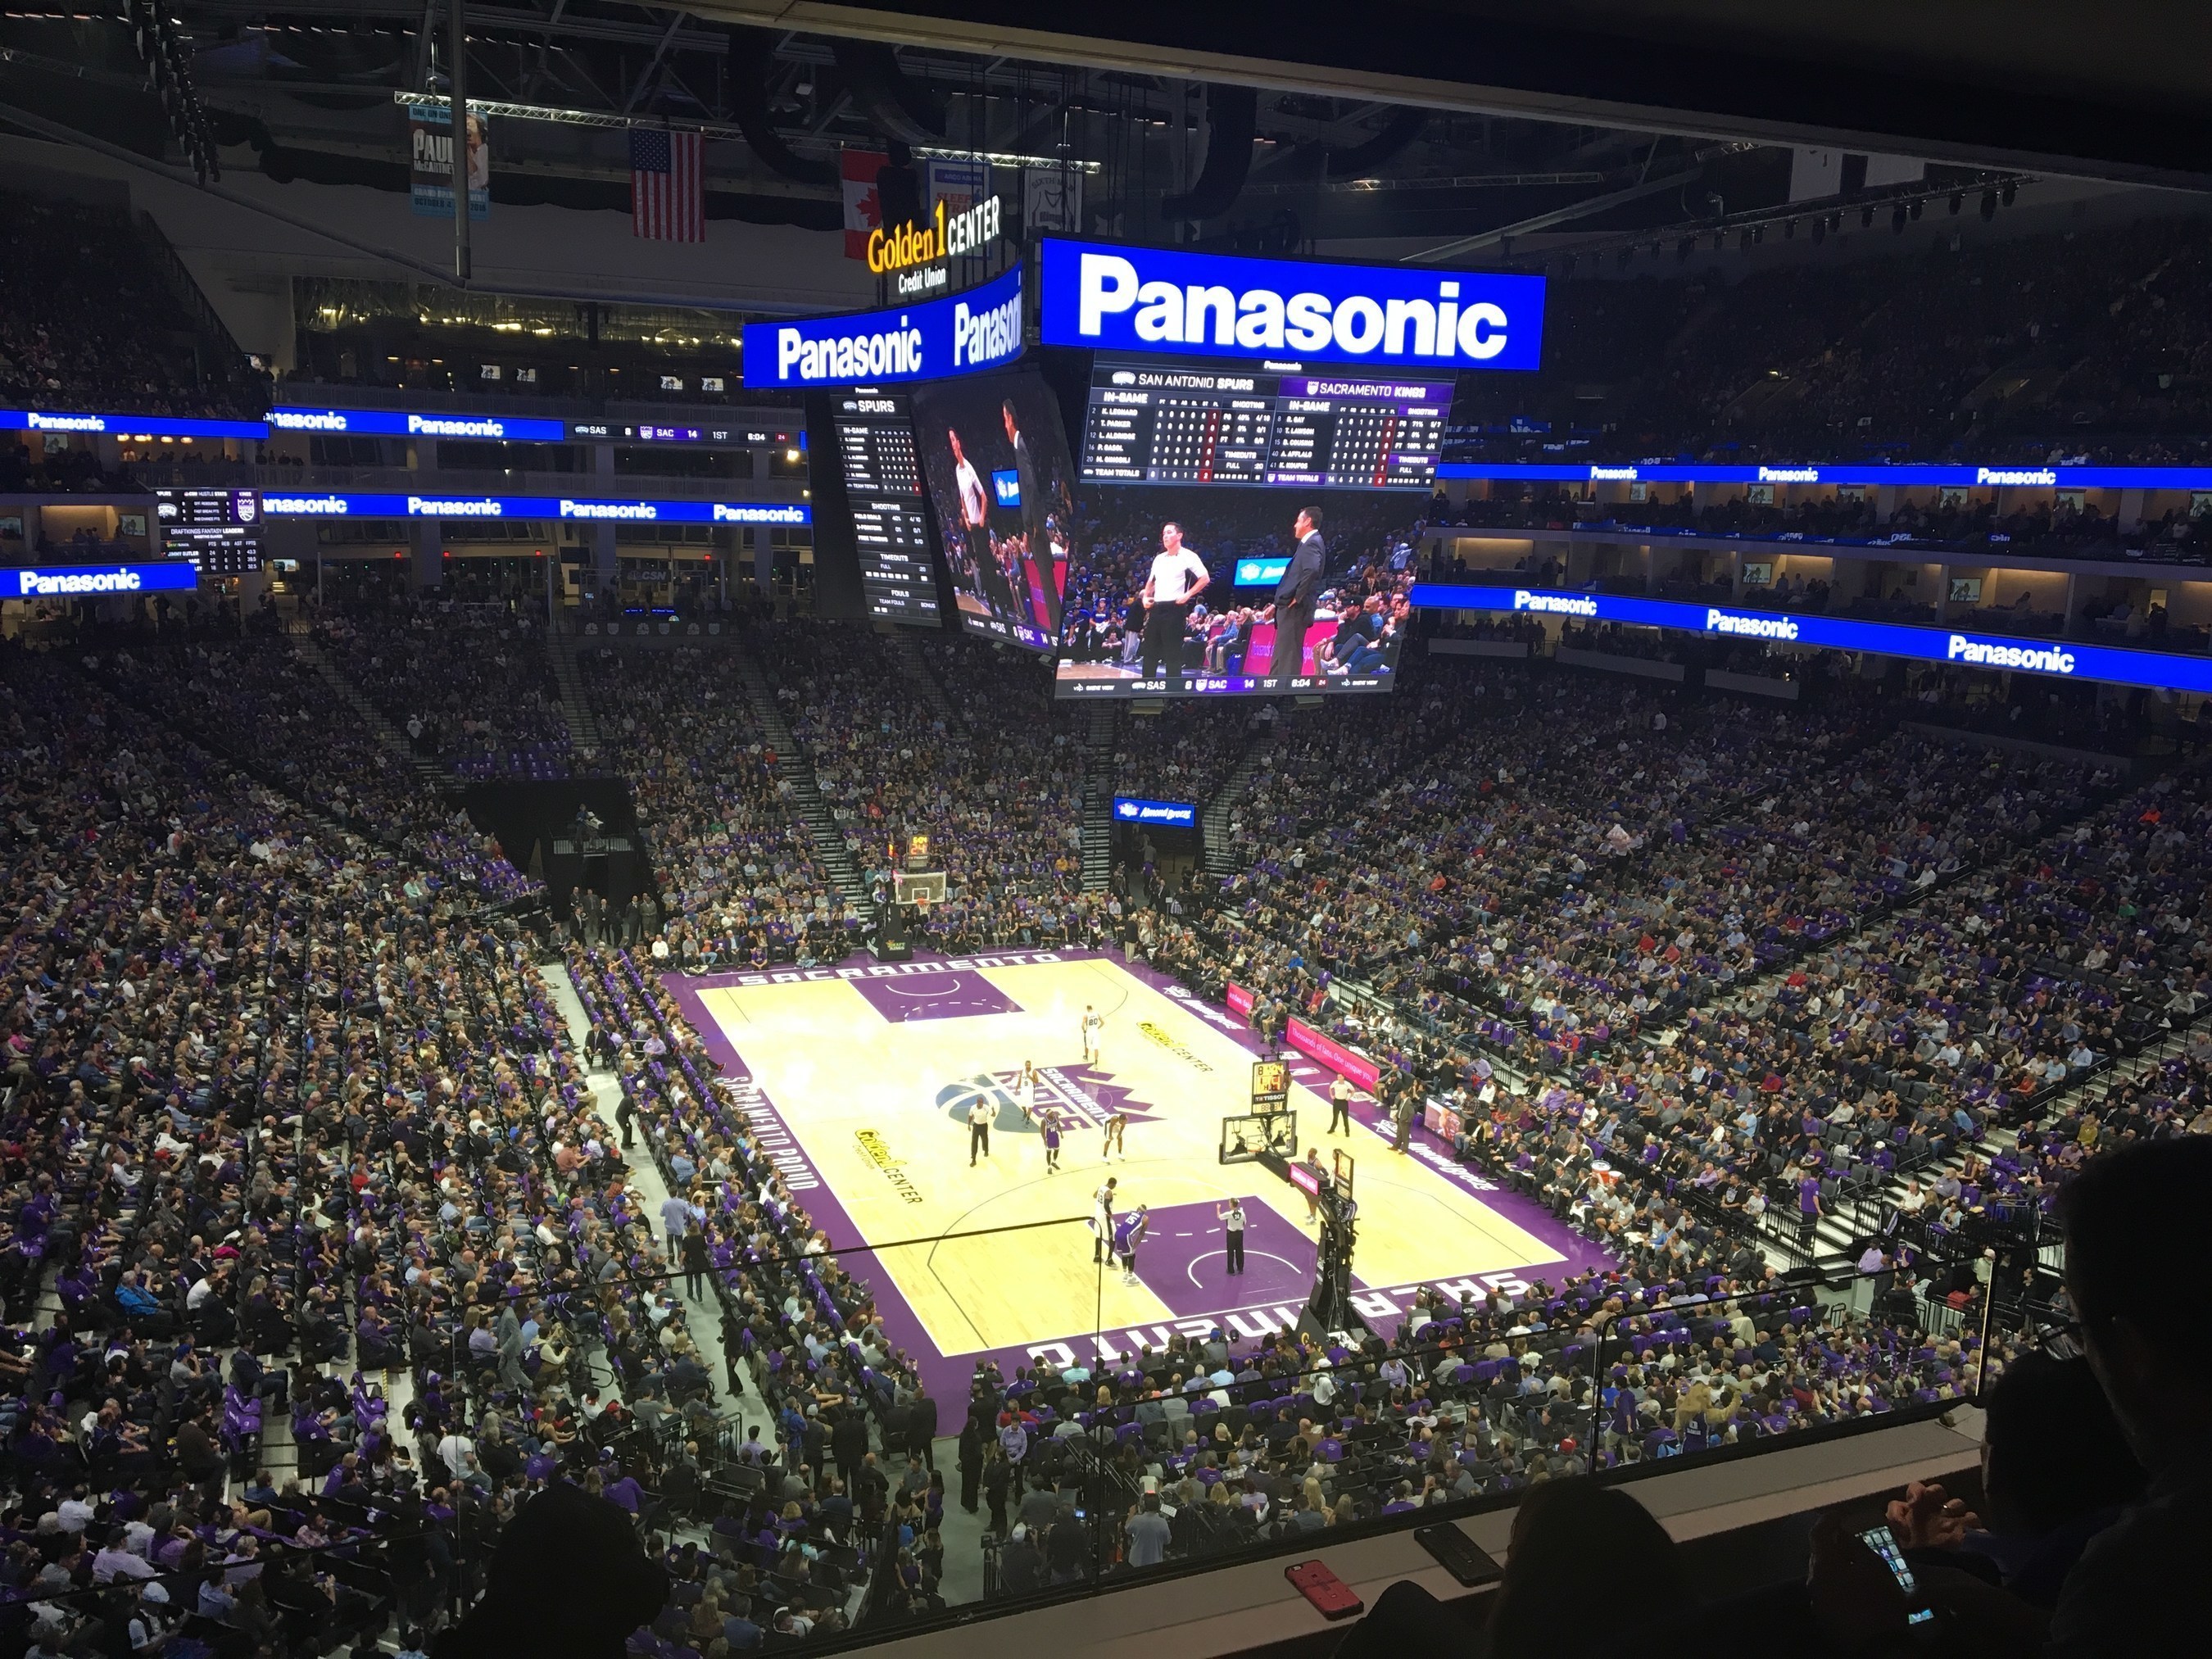 Utilizing the latest in LED technology, Panasonic installed over 13,000 square feet of LED video, totaling over 33 million individual LED pixels across Golden 1 Center.